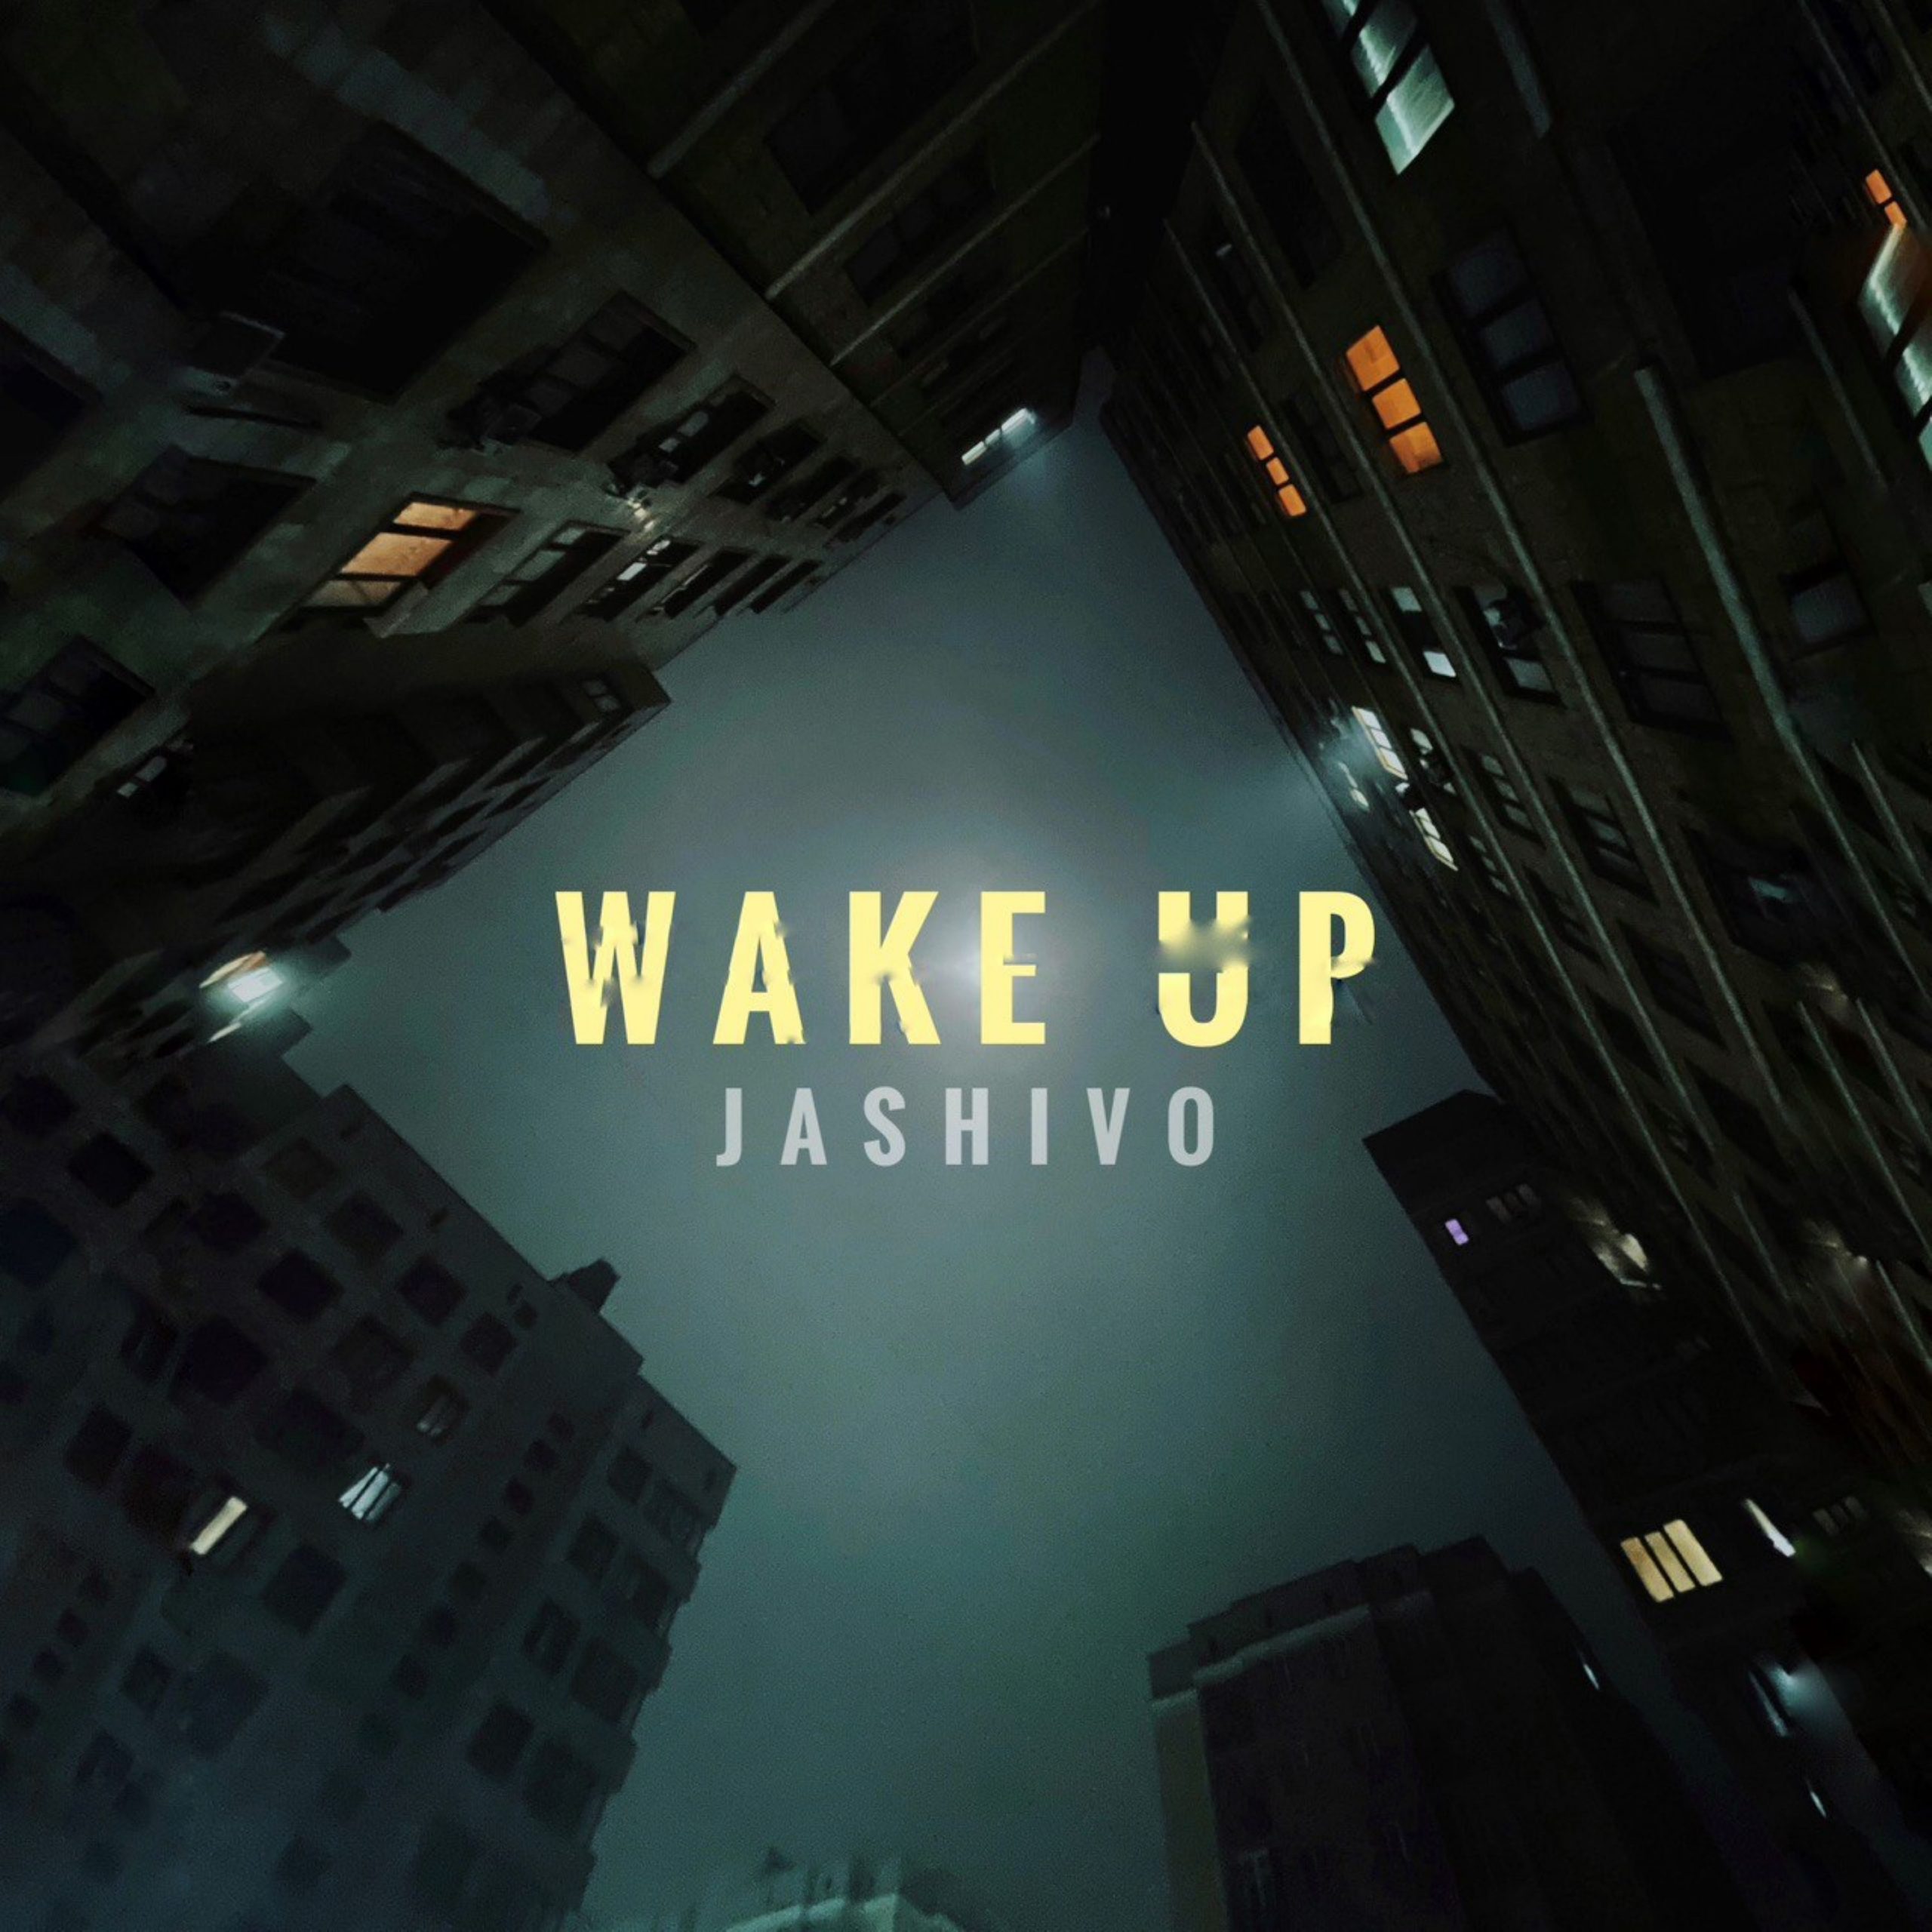 Jashivo’s Call for Resistance: ‘Wake Up’ Inspires Hope in Youth Worldwide on the playlist